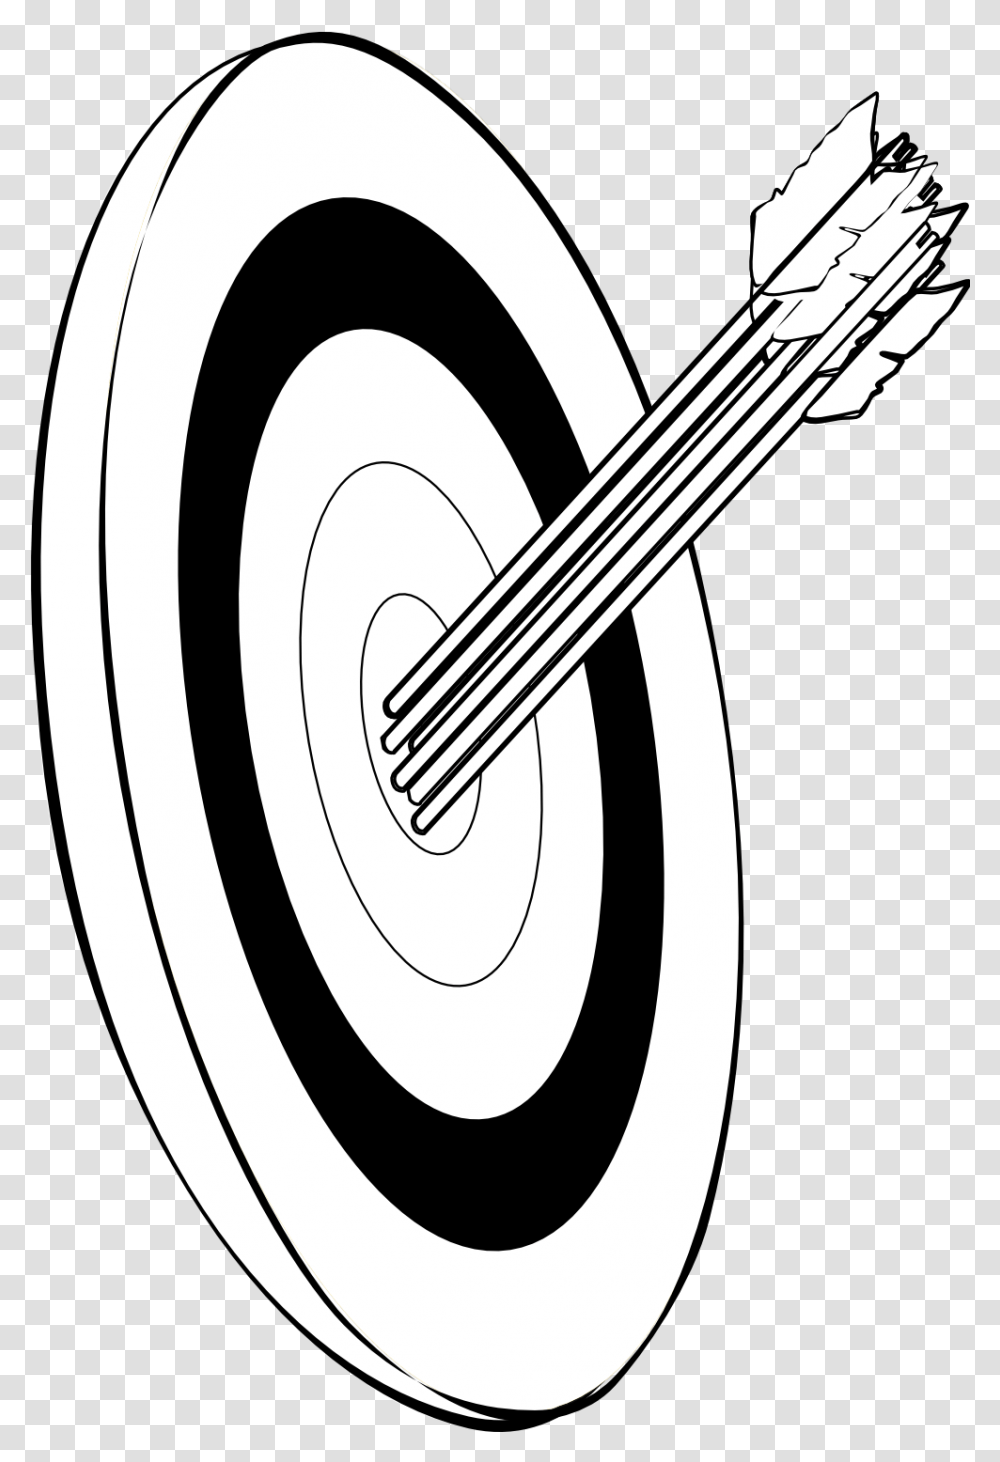 Download Arrows And Target Snarkhunter In The Gold Black And White Archery Clip Art, Darts, Game, Spiral, Shooting Range Transparent Png